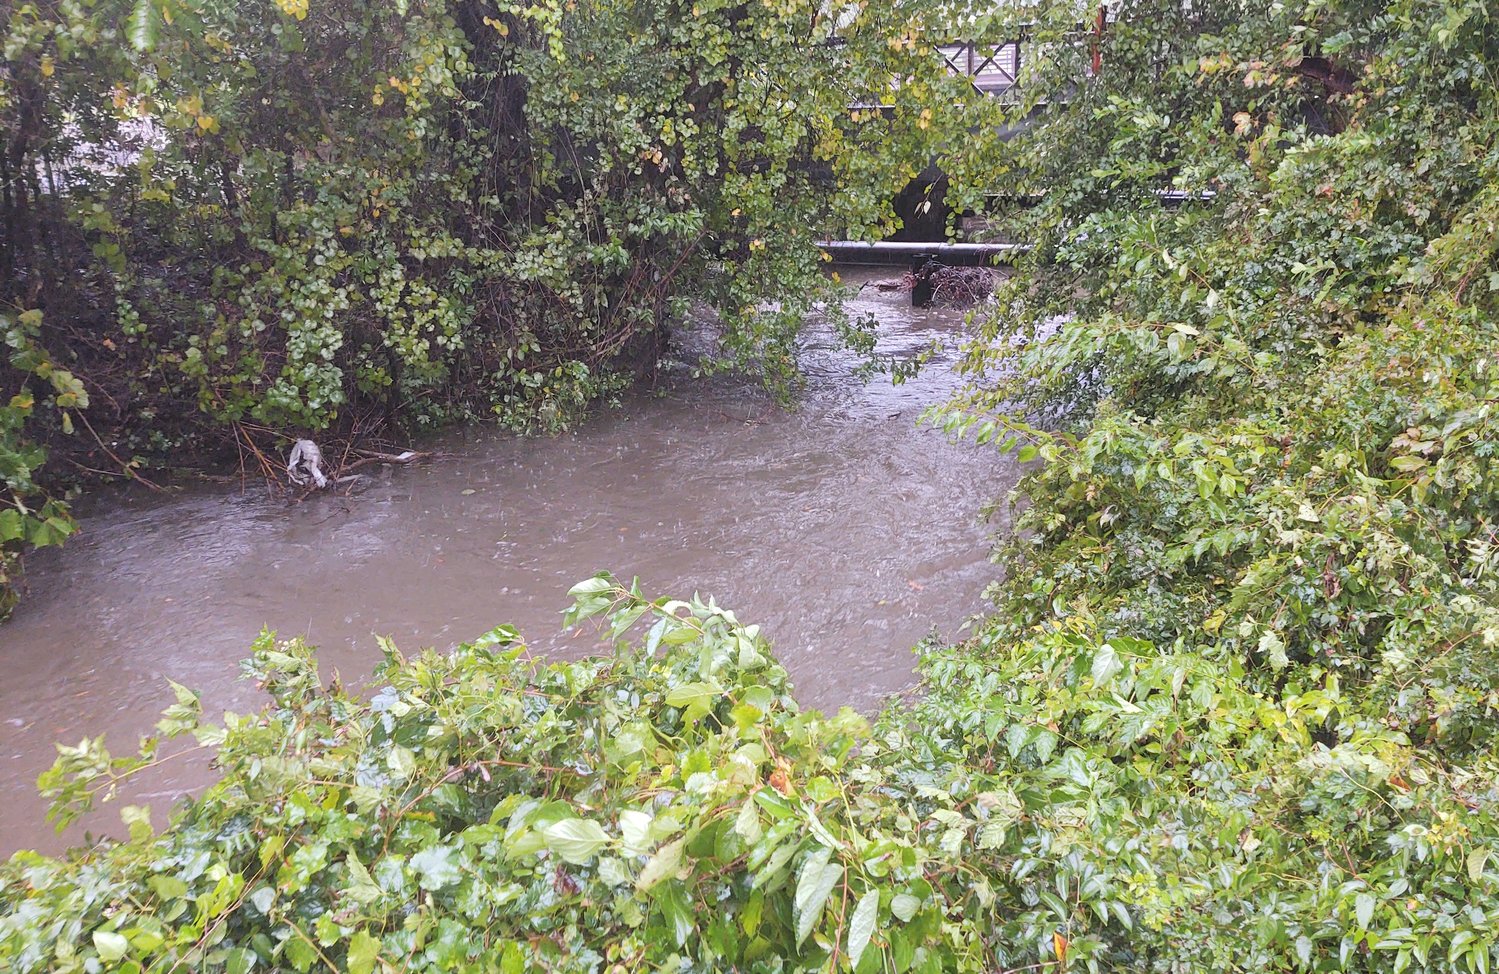 A swift current runs through Cross Creek near Festival Park in downtown Fayetteville just before 5 p.m. Friday as the remnants of Hurricane Ian passed through the region.